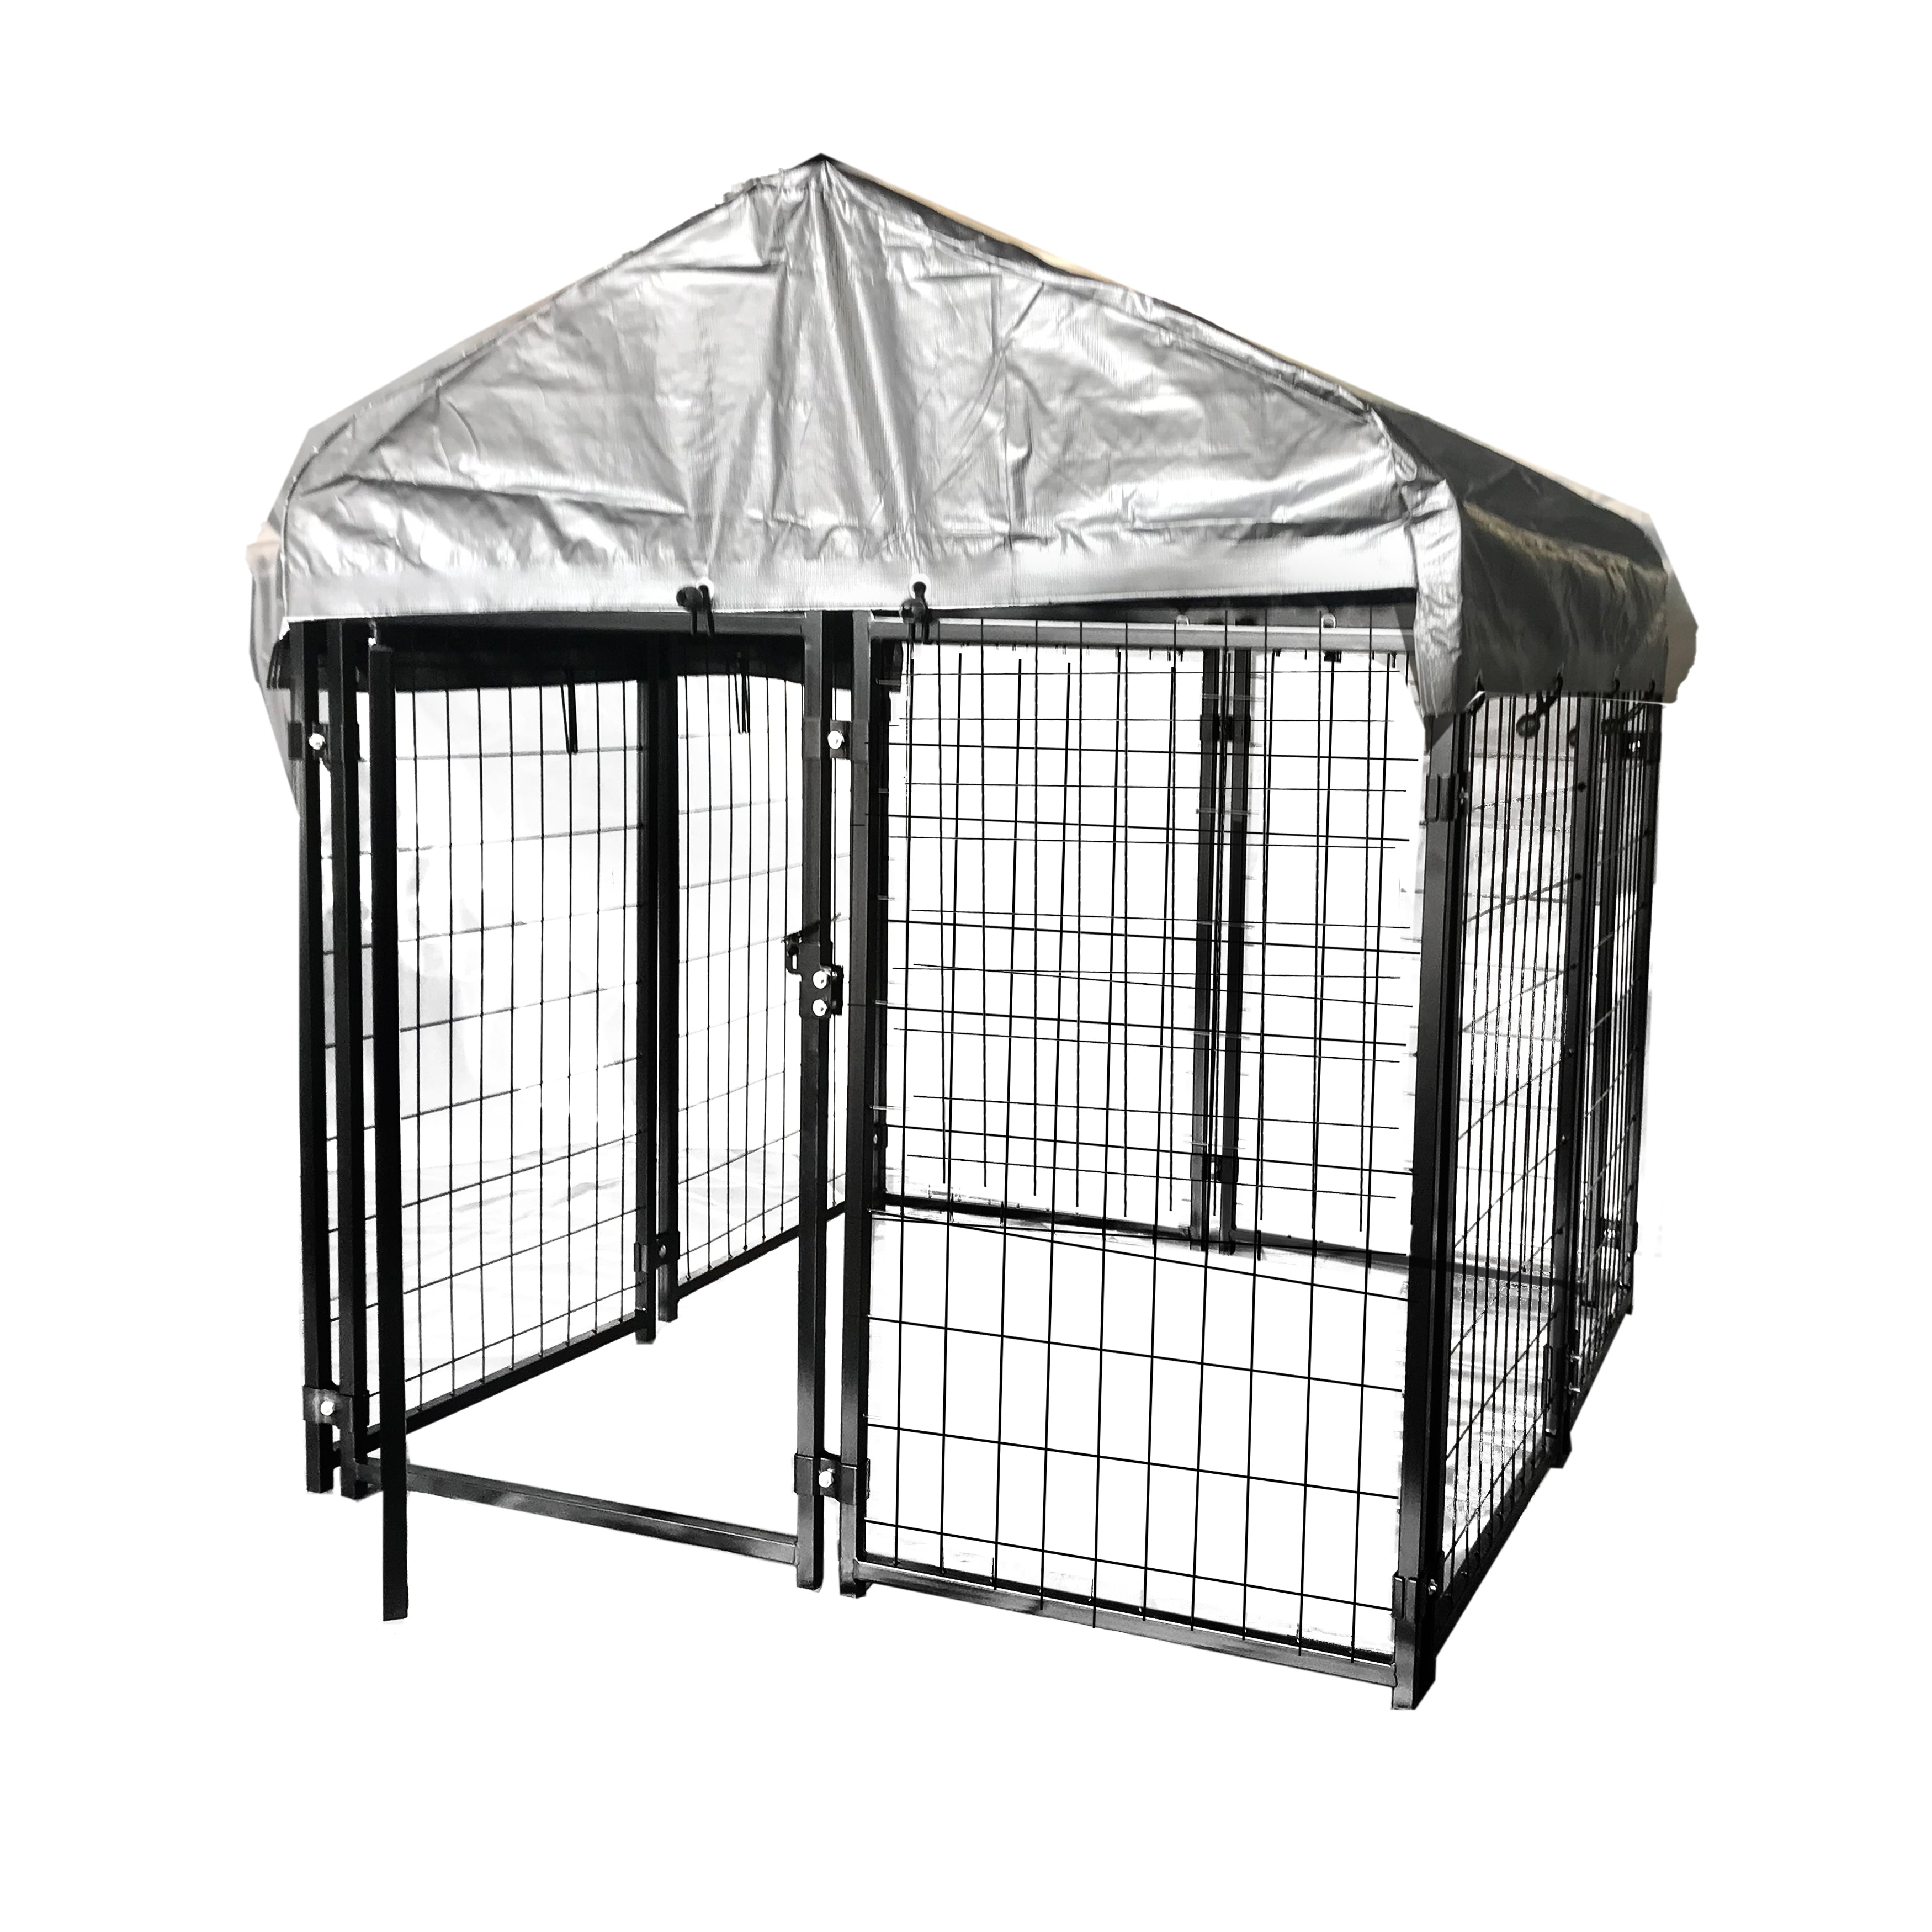 ALEKO DK4X4X4RF Expandable Heavy Duty Dog Kennel and Playpen Kit with Roof and Rain Cover - 4 x 4 x 4.5 Feet - Black